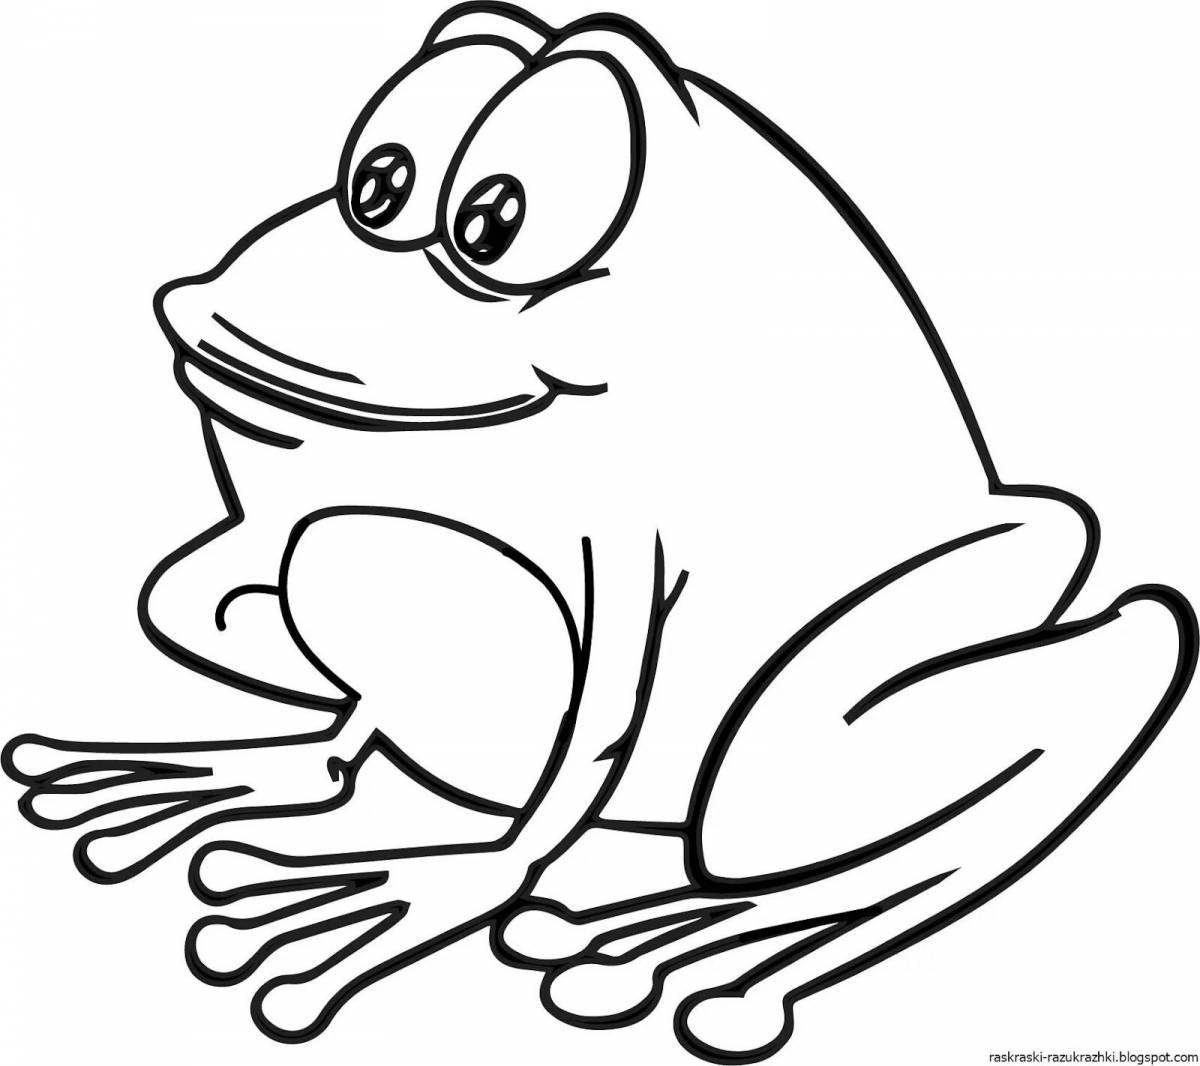 A fun frog coloring book for kids